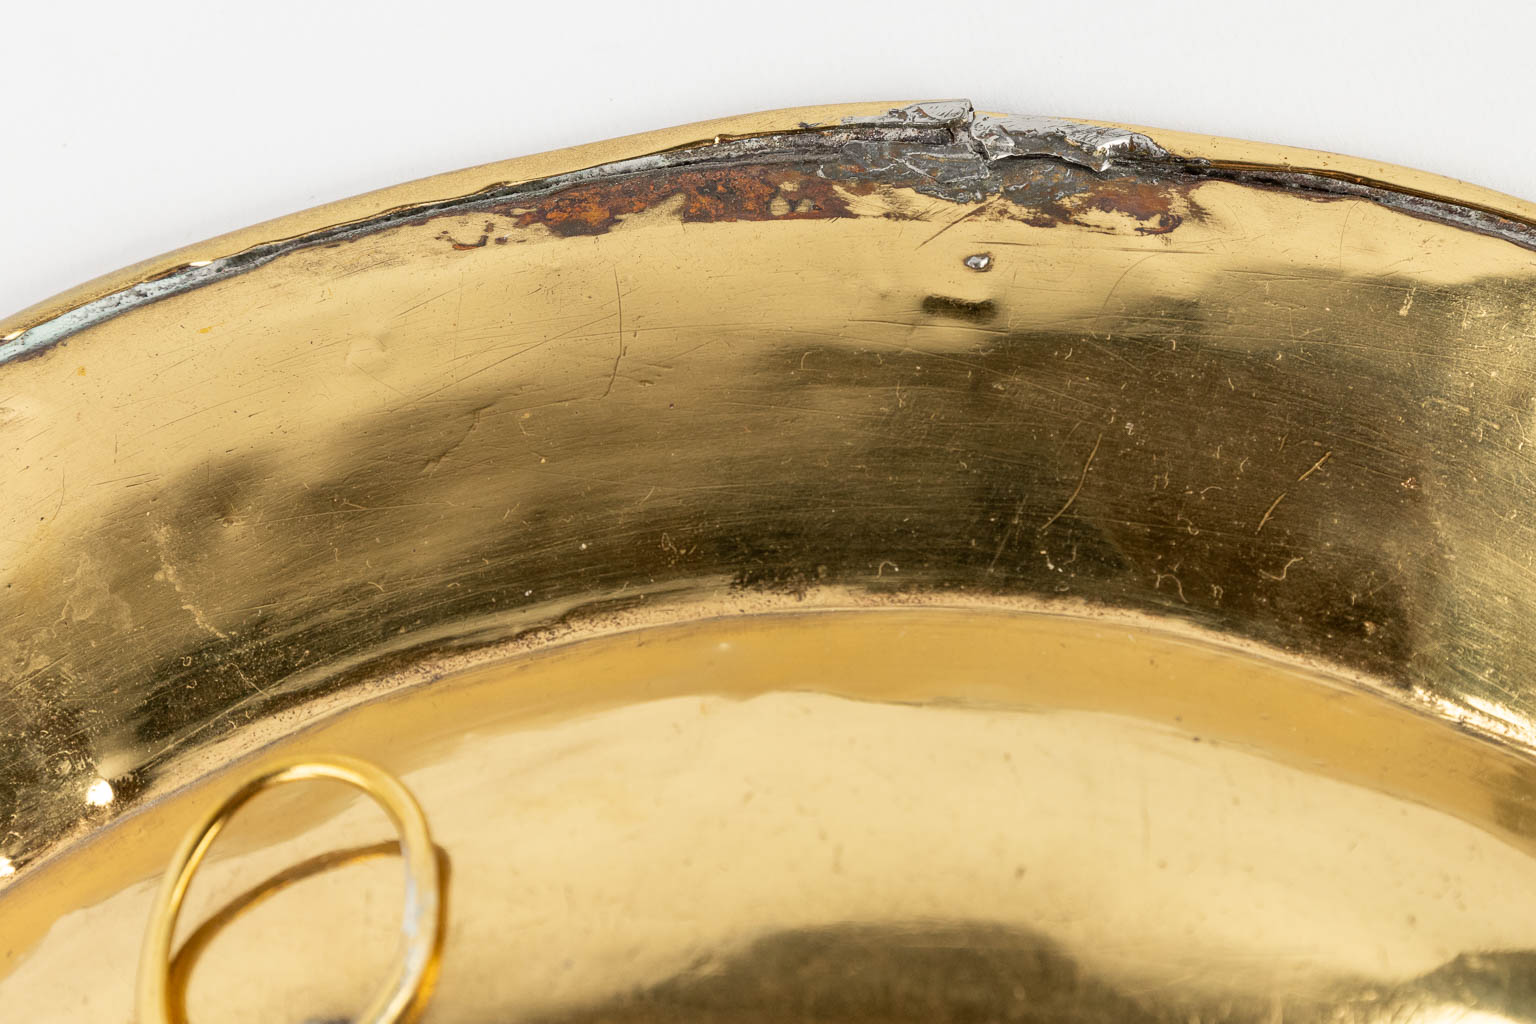 A large baptism bowl, Brass, images of the Holy Lamb. 16th/17th C. (H:3,7 x D:37 cm)